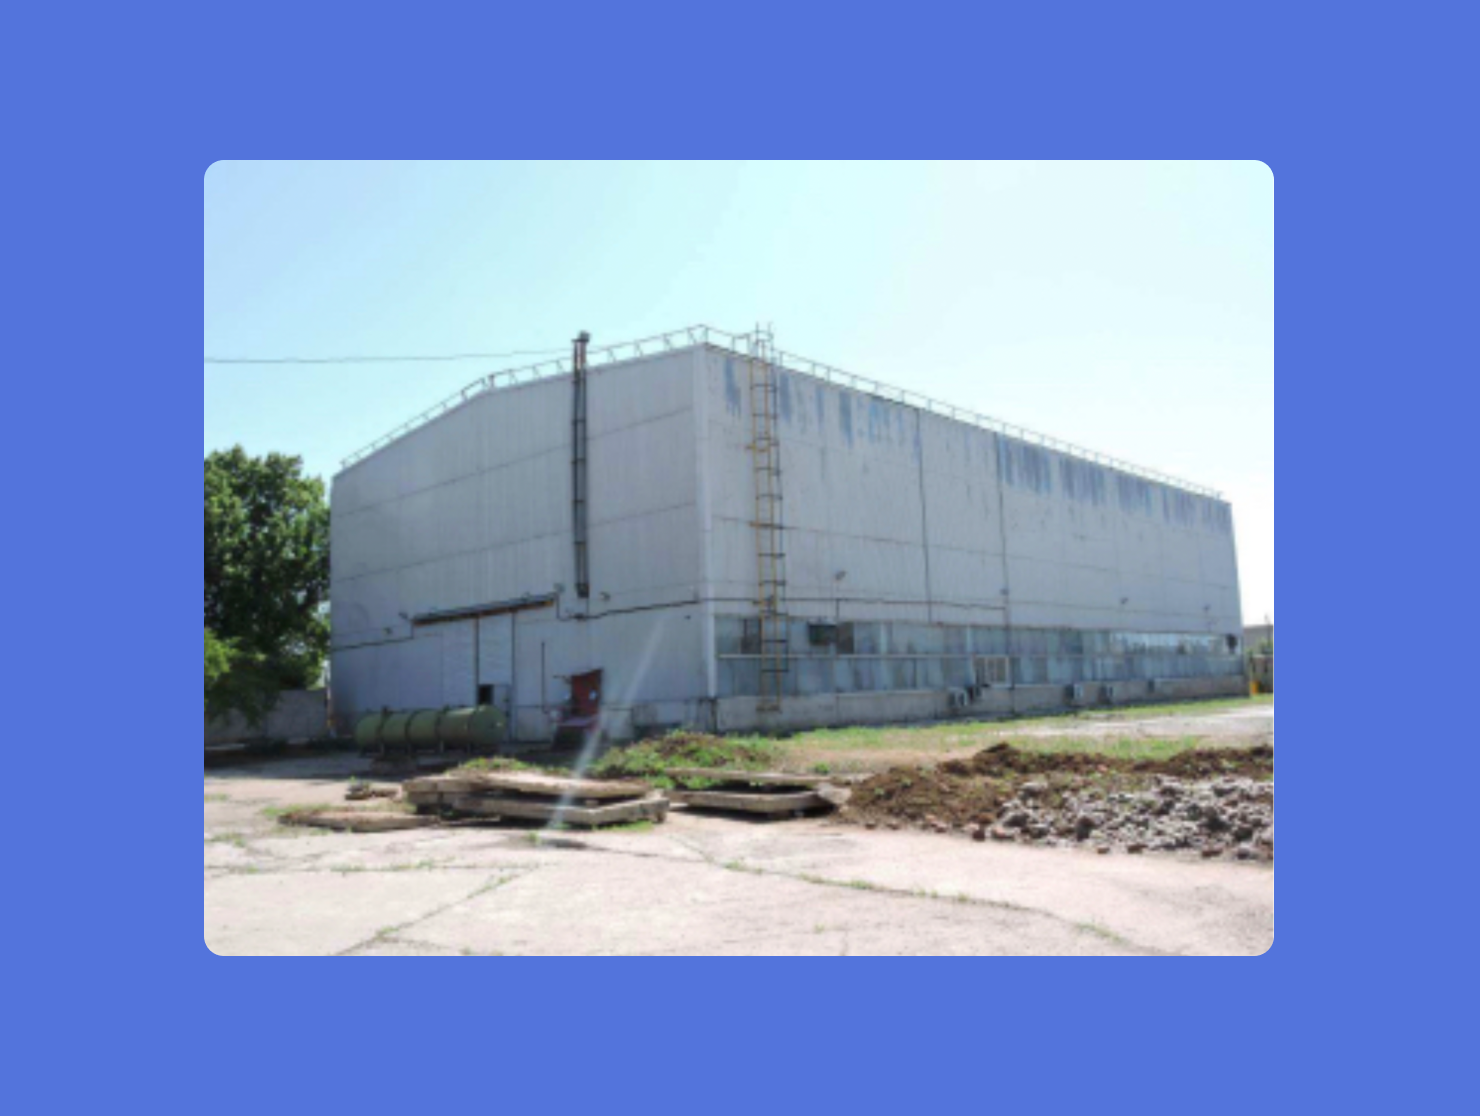 One of the buildings of the factory in Akhtubinsk-7 city